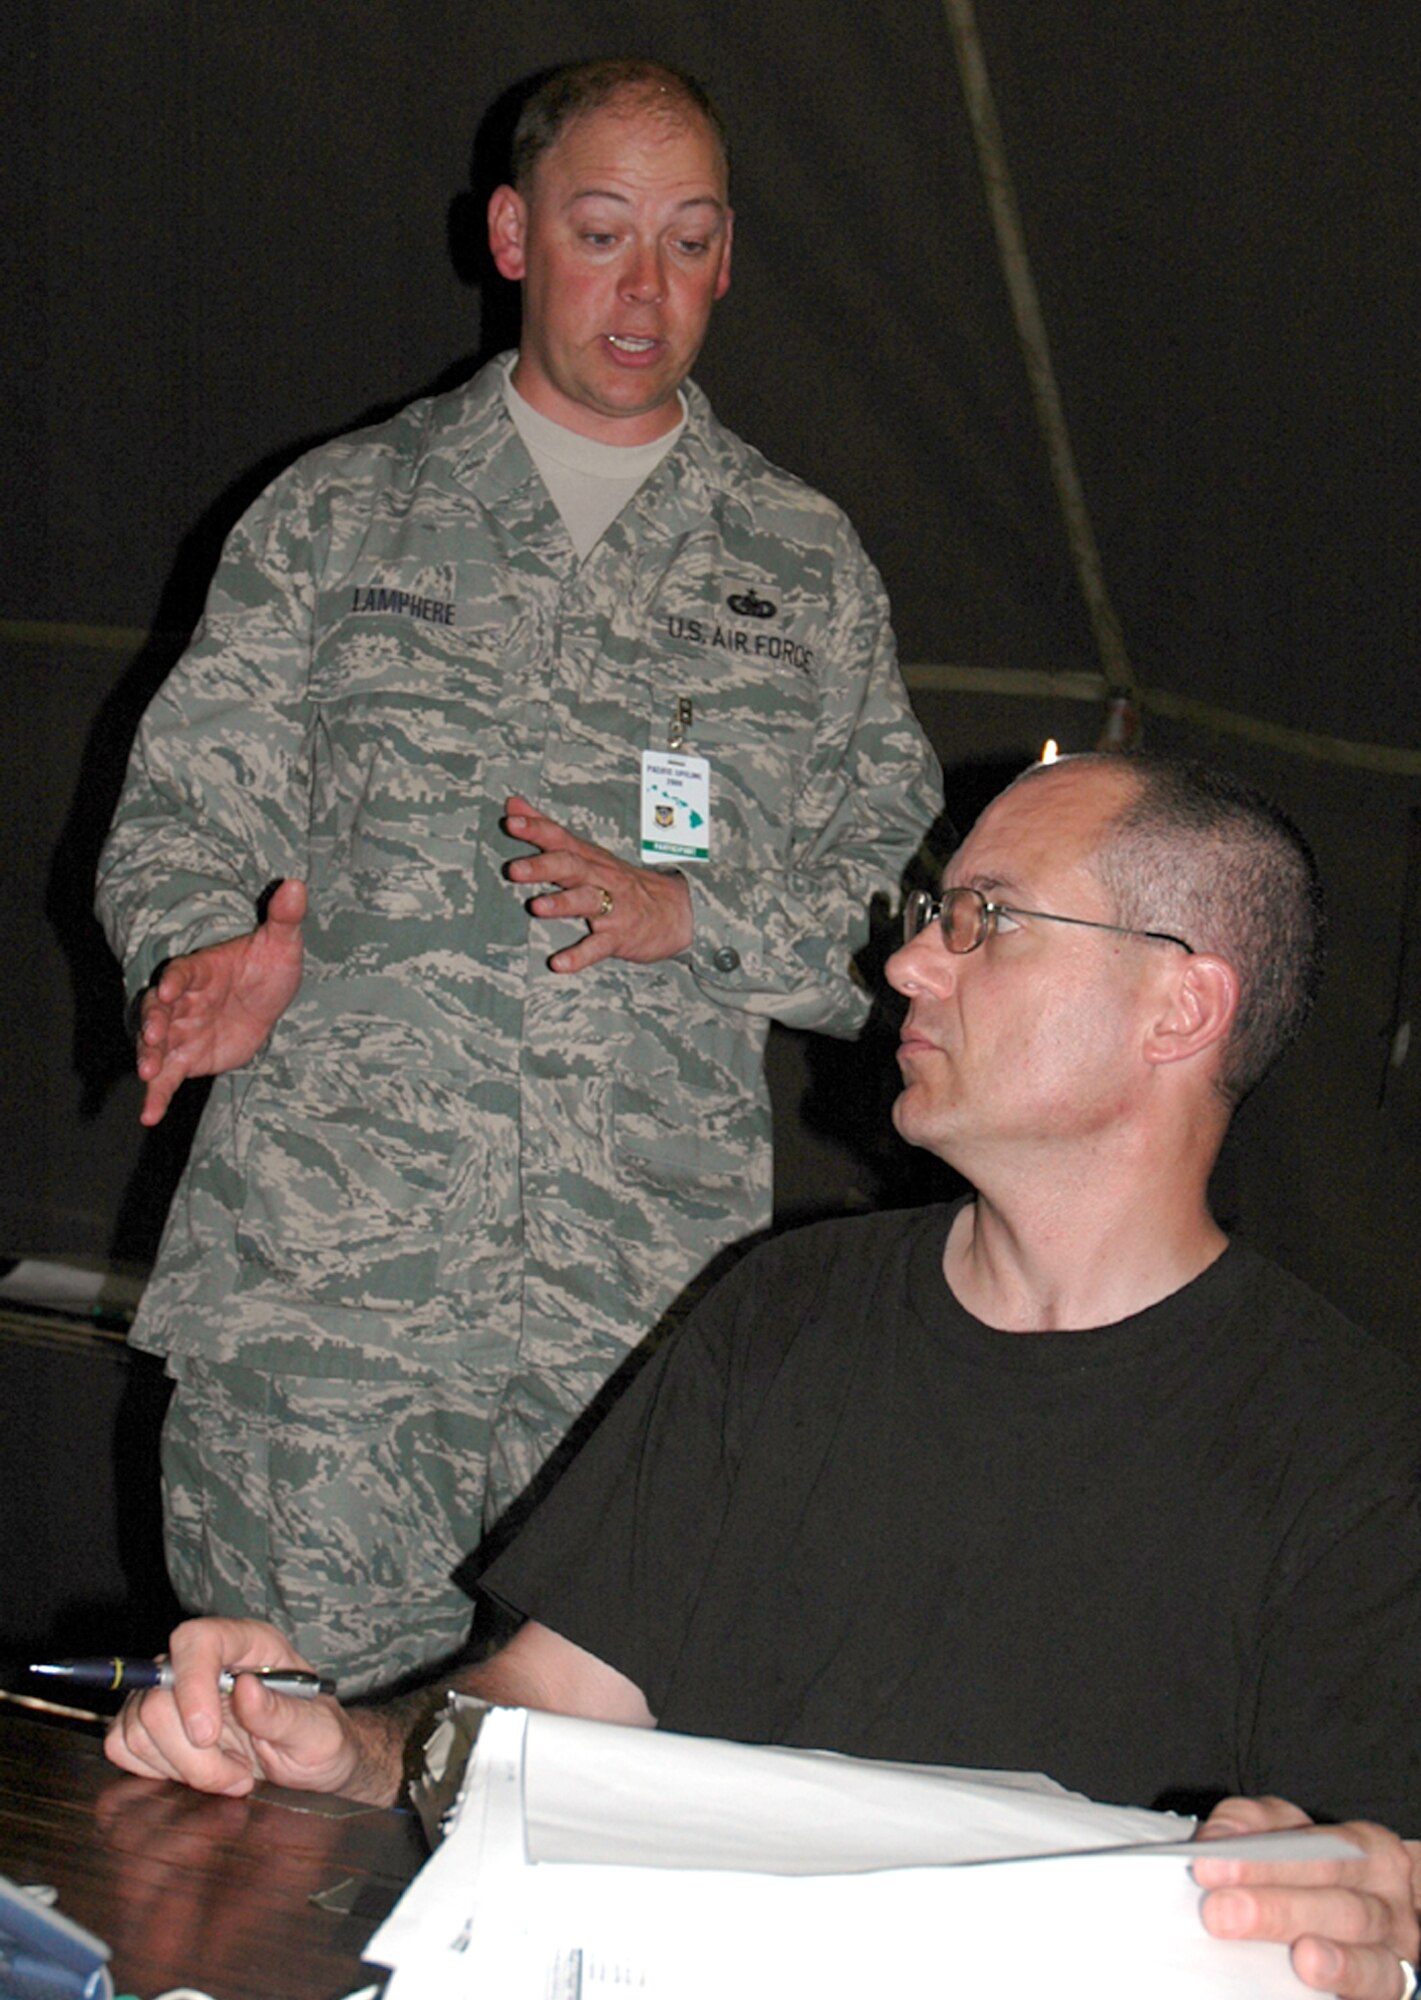 Master Sgt. Todd Lamphere, 446th Aerospace Medicine Squadron first sergeant from McChord Air Force Base, Wash., talks with Tech. Sgt. Mark Marinov, one of the PERSCO team members from the 446th Mission Support Squadron, during the Pacific Lifeline exercise.  Sergeant Lamphere is the first sergeant for everyone at Kauai during the exercise.  Pacific Lifeline is a humanitarian assistance disaster response exercise taking place on three Hawaiian Islands Jan. 26 to Feb. 9.  More than 900 Department of Defense personnel are participating, including 145 Reservists from the 446th Airlift Wing at McChord. (U.S. Air Force photo/Capt. Jennifer Gerhardt)